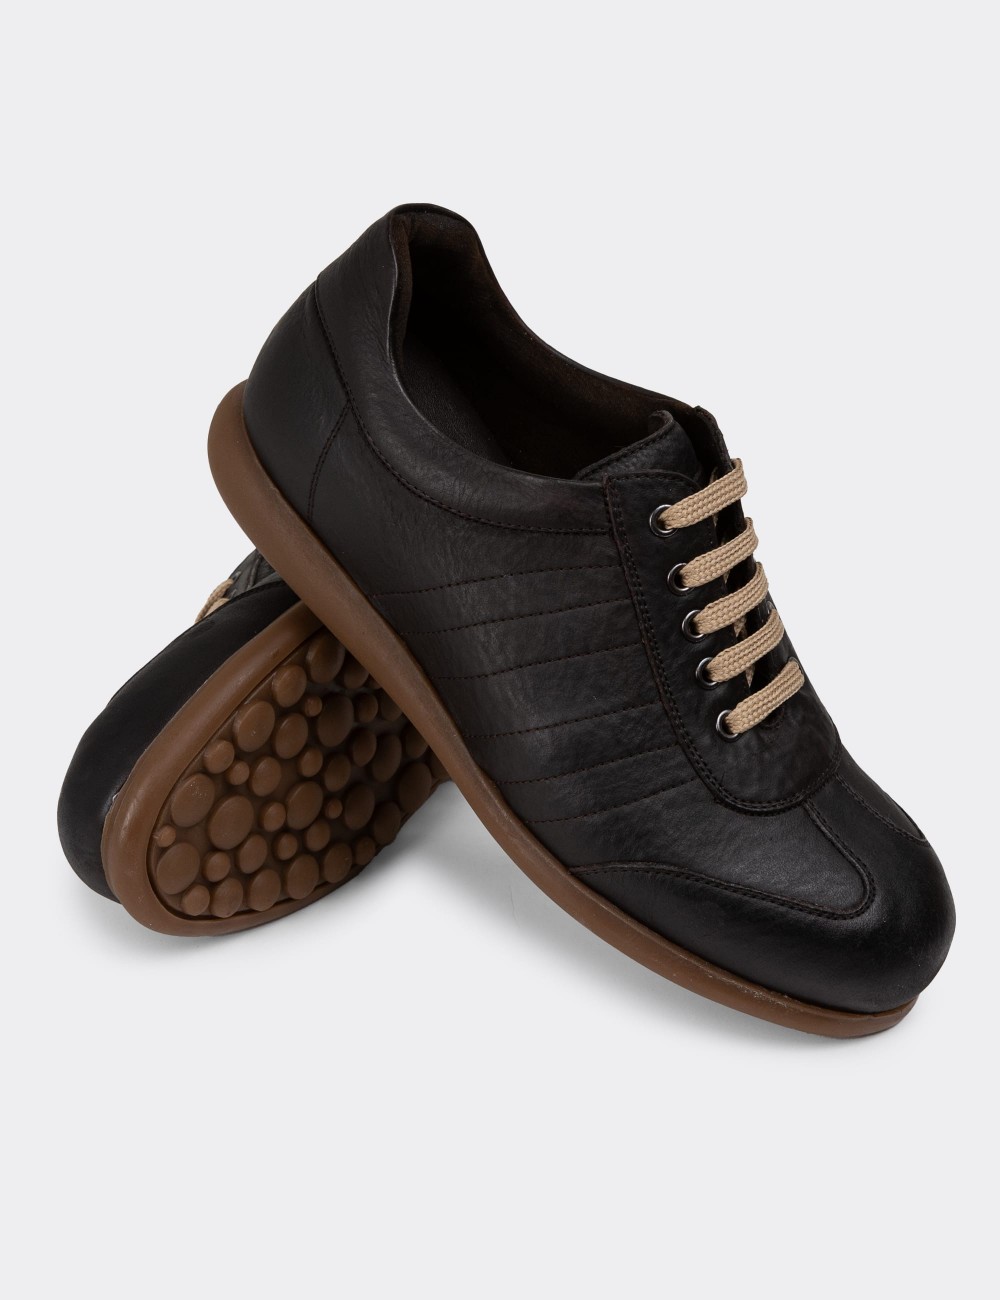 Brown Leather Lace-up Shoes - 01826MKHVC22